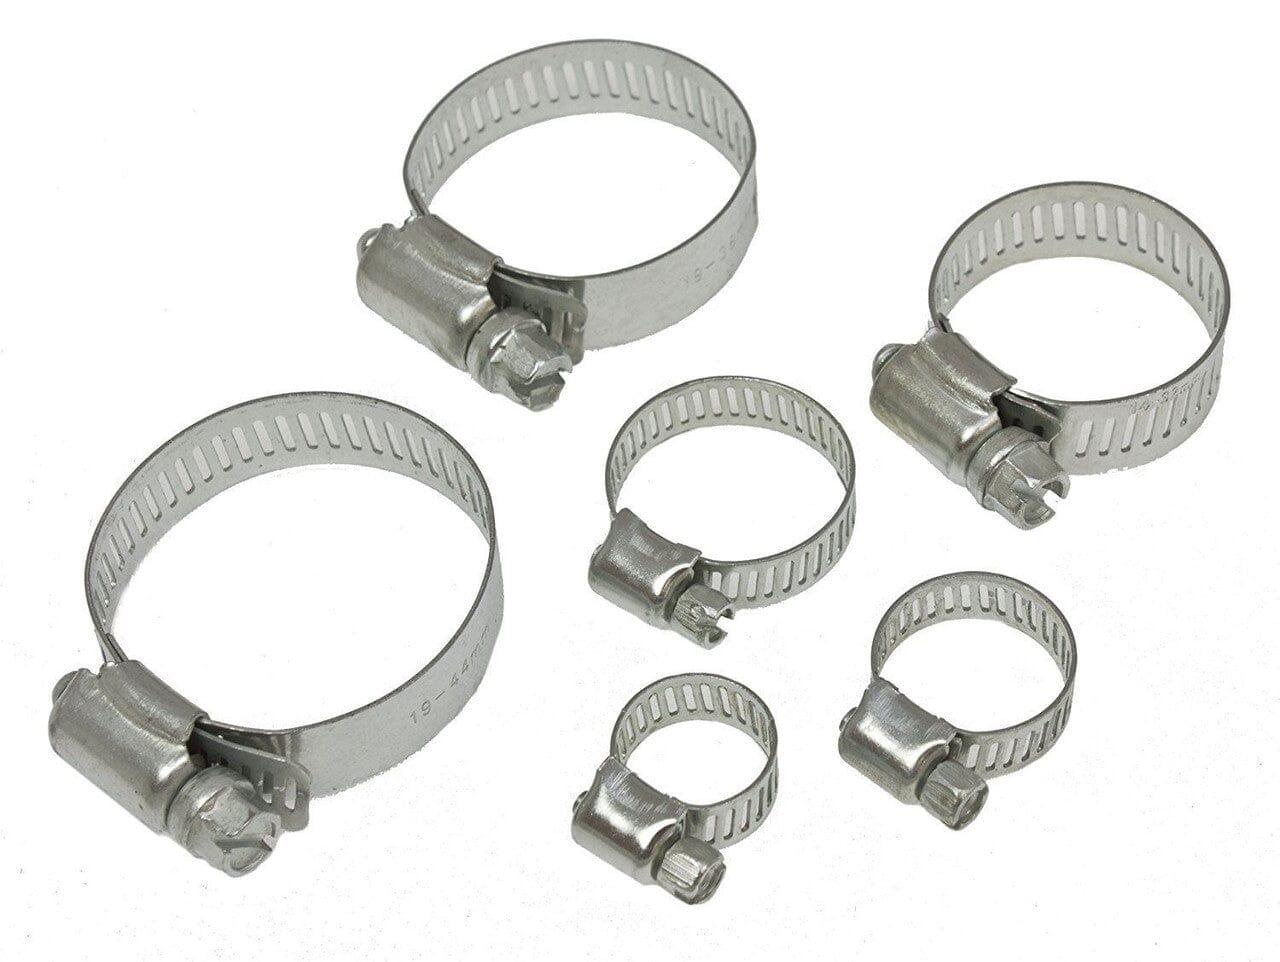 35pc stainless steel Hose Clamp Jubilee clips with driver tool HW039 - Tools 2U Direct SW